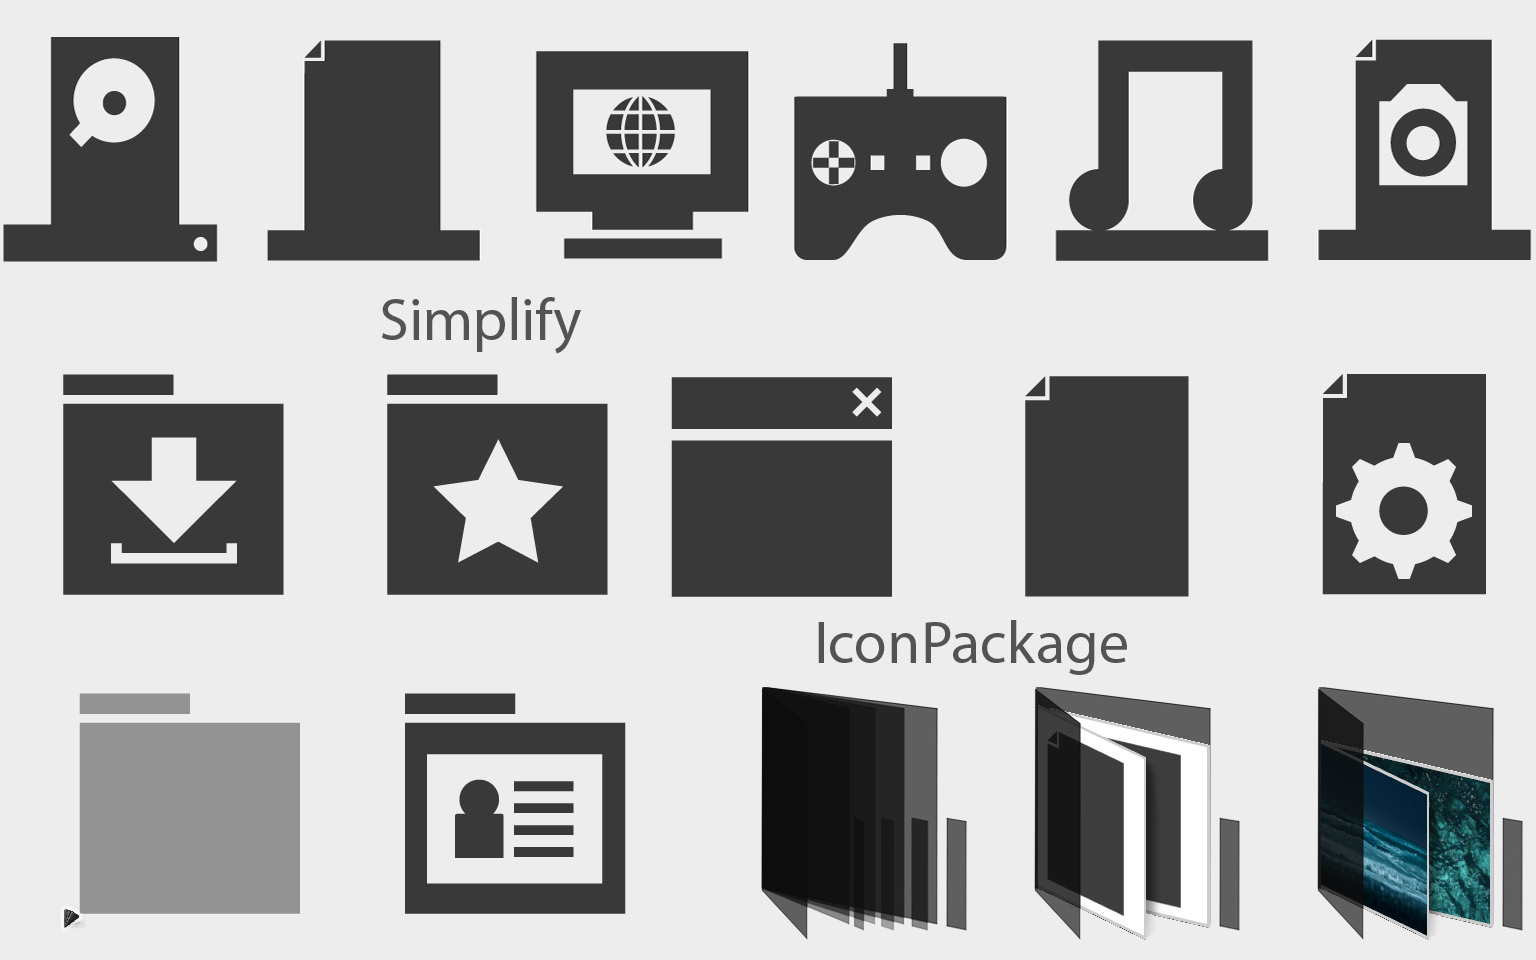 Simplify IconPackage